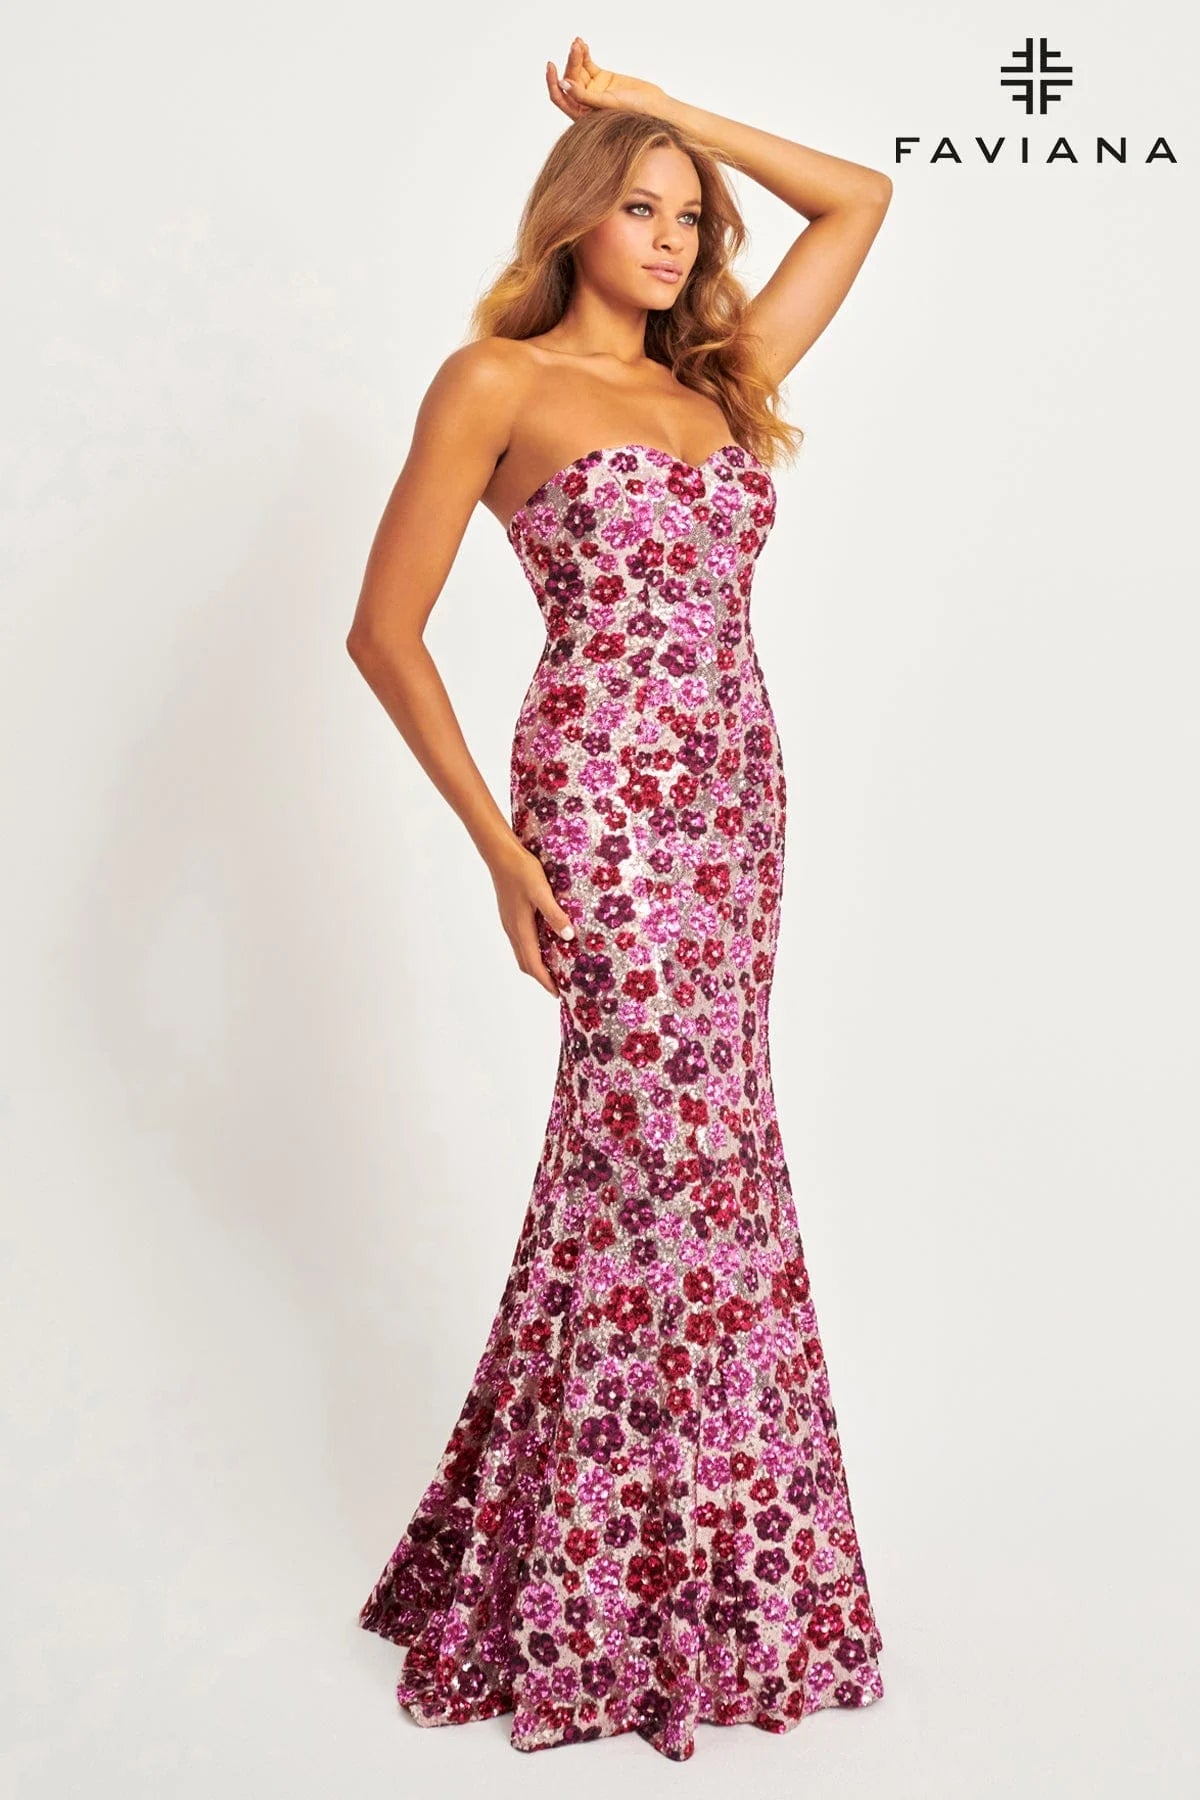 Pink/Silver Strapless Sequin Mermaid Dress With Colorful Floral Design | 11036